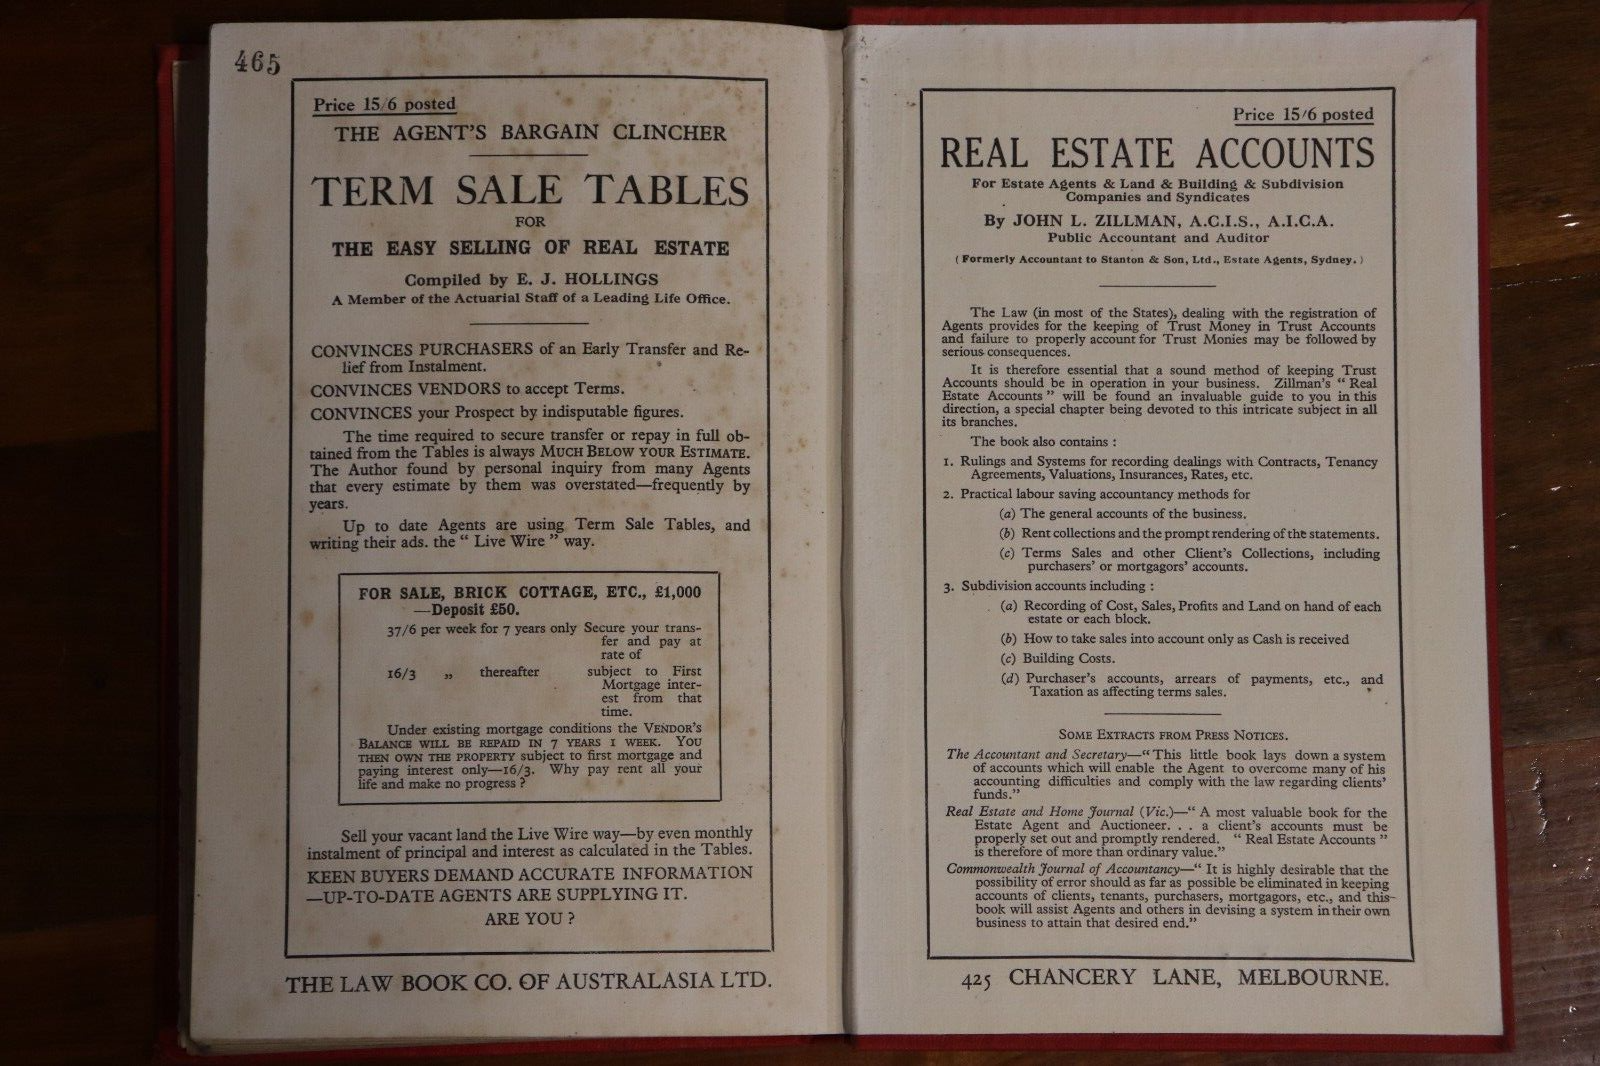 The Law Relating To Estate Agents & Auctioneers - 1925 - Australian History Book